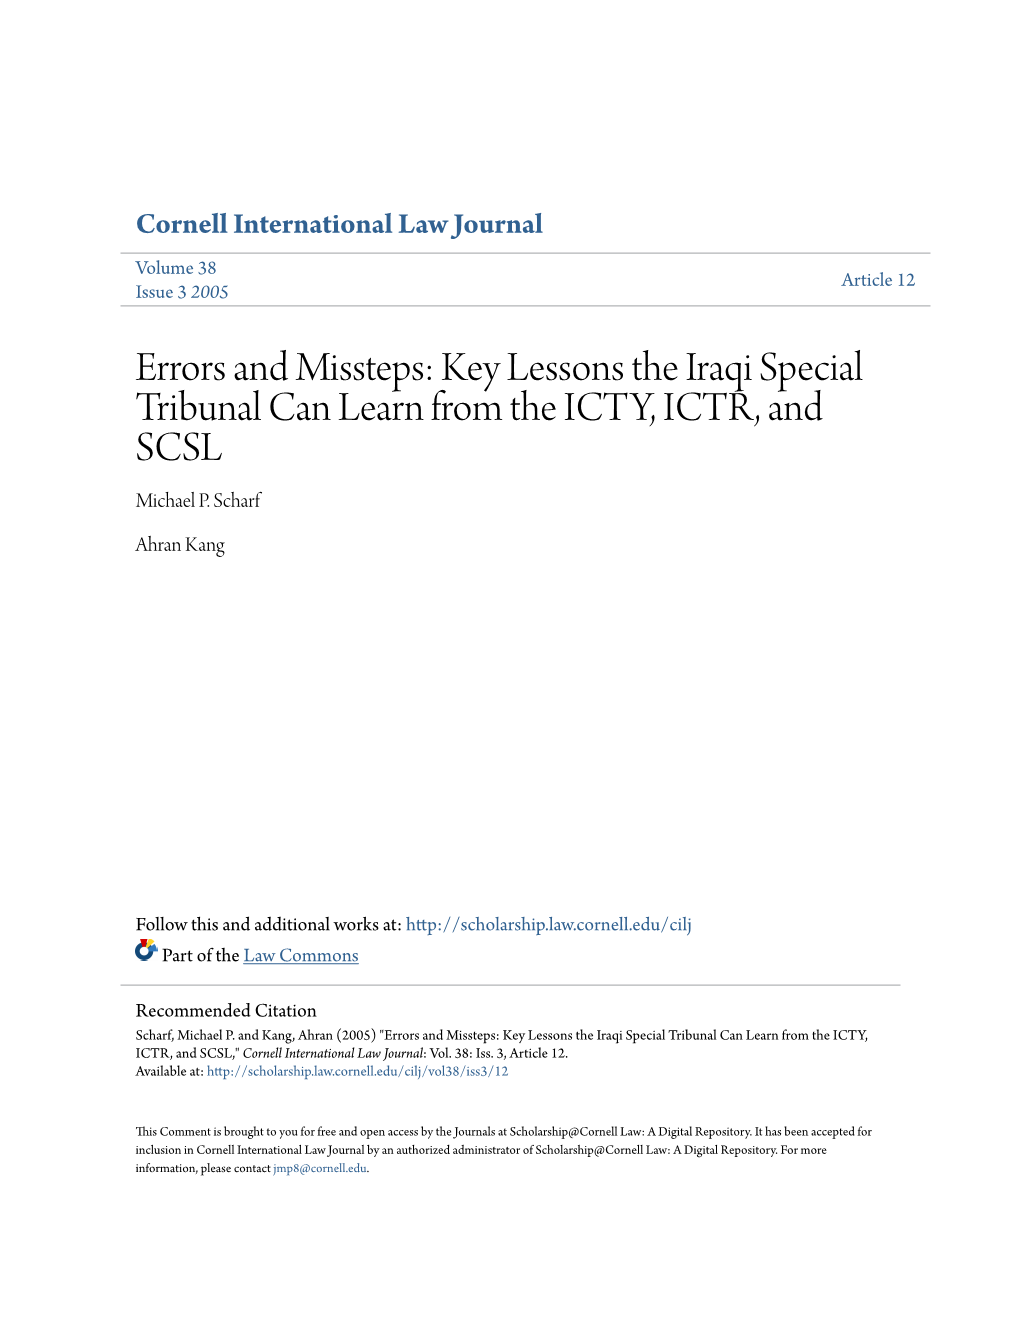 Errors and Missteps: Key Lessons the Iraqi Special Tribunal Can Learn from the ICTY, ICTR, and SCSL Michael P